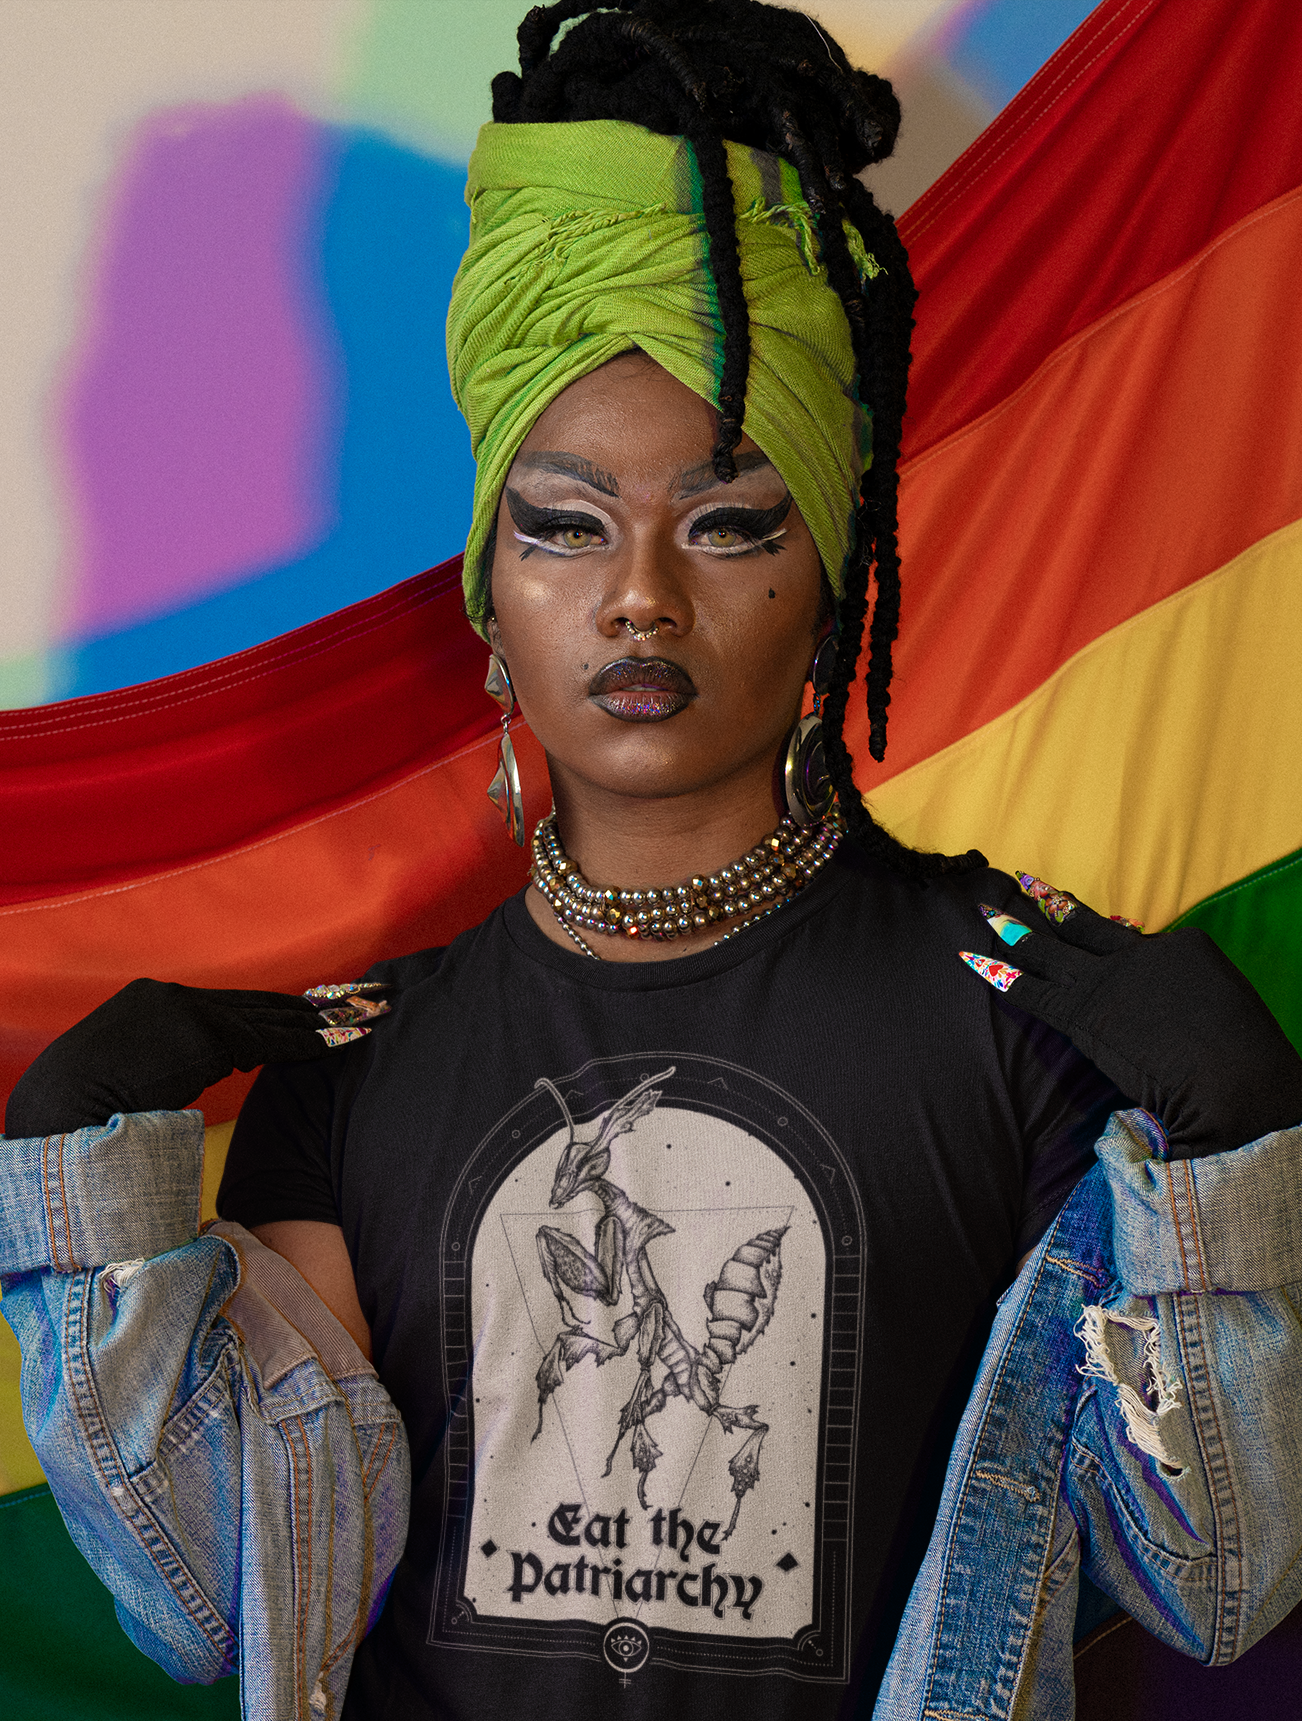 a fashionable black trans woman wearing a green head wrap, punk rock denim jacket, striking makeup, and goth black tee with a witchy feminist praying mantis illustration that says "eat the patriarchy" against a rainbow pride flag